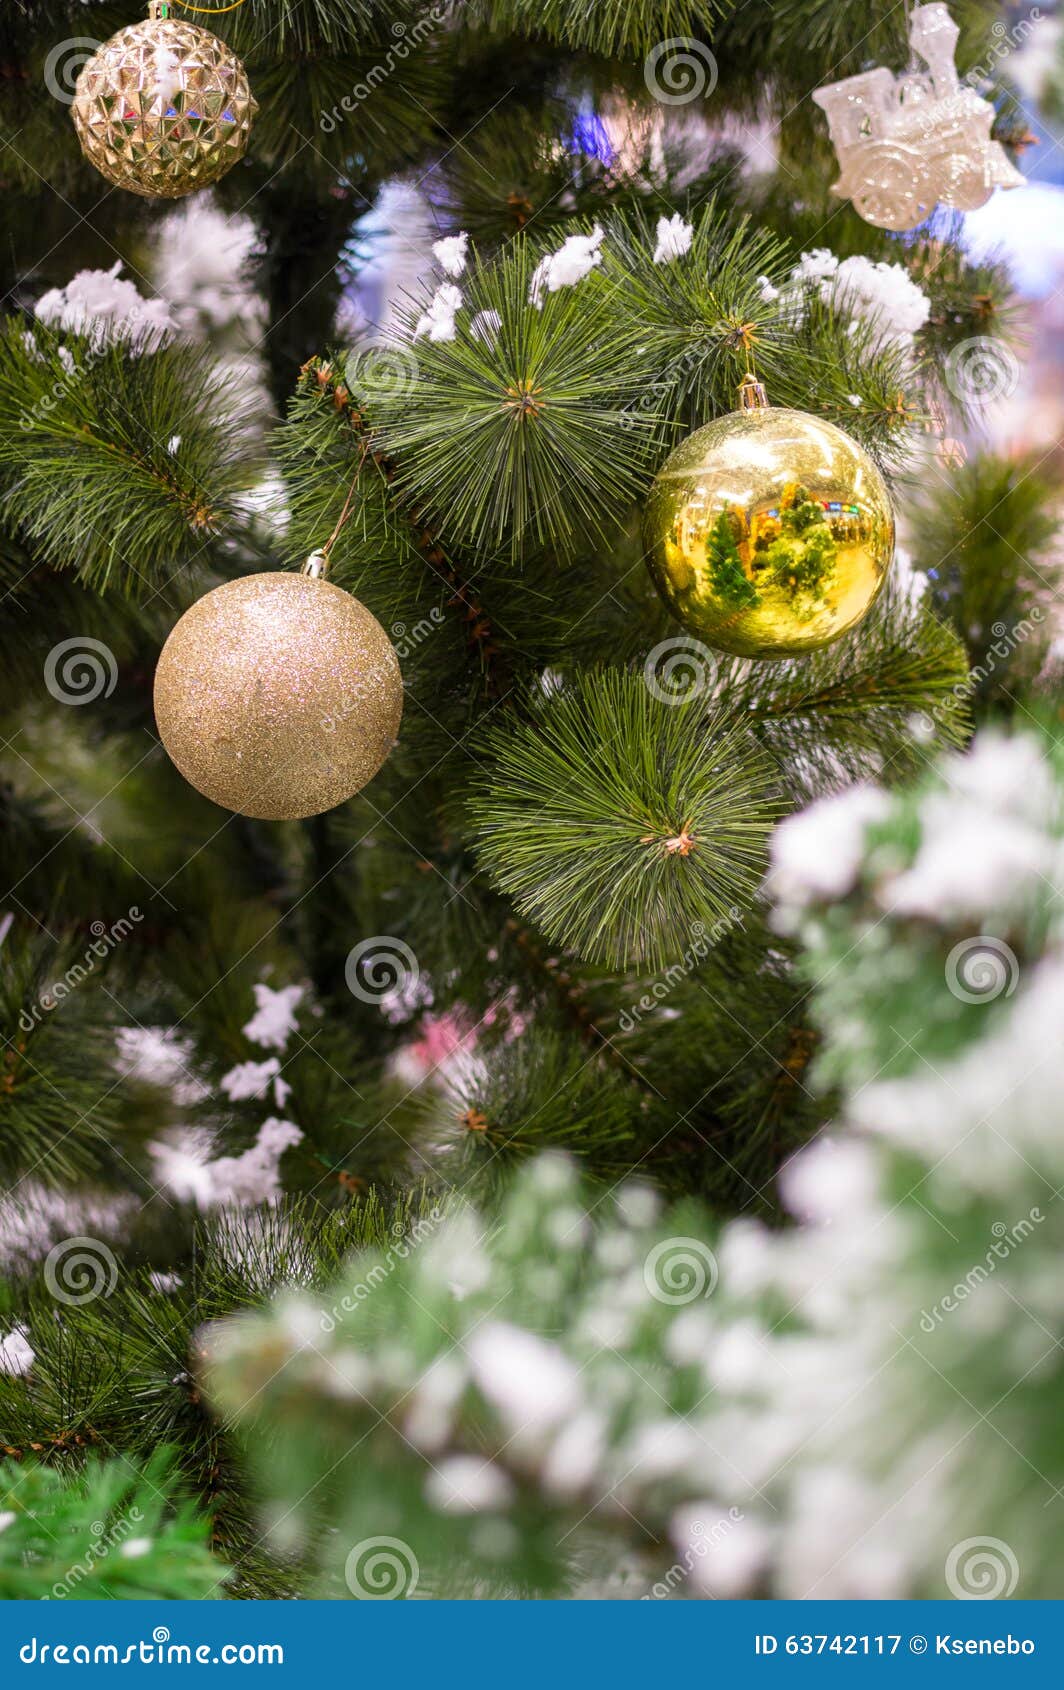 Three Golden Christmas Baubles on a Tree Brunch Stock Image - Image of ...